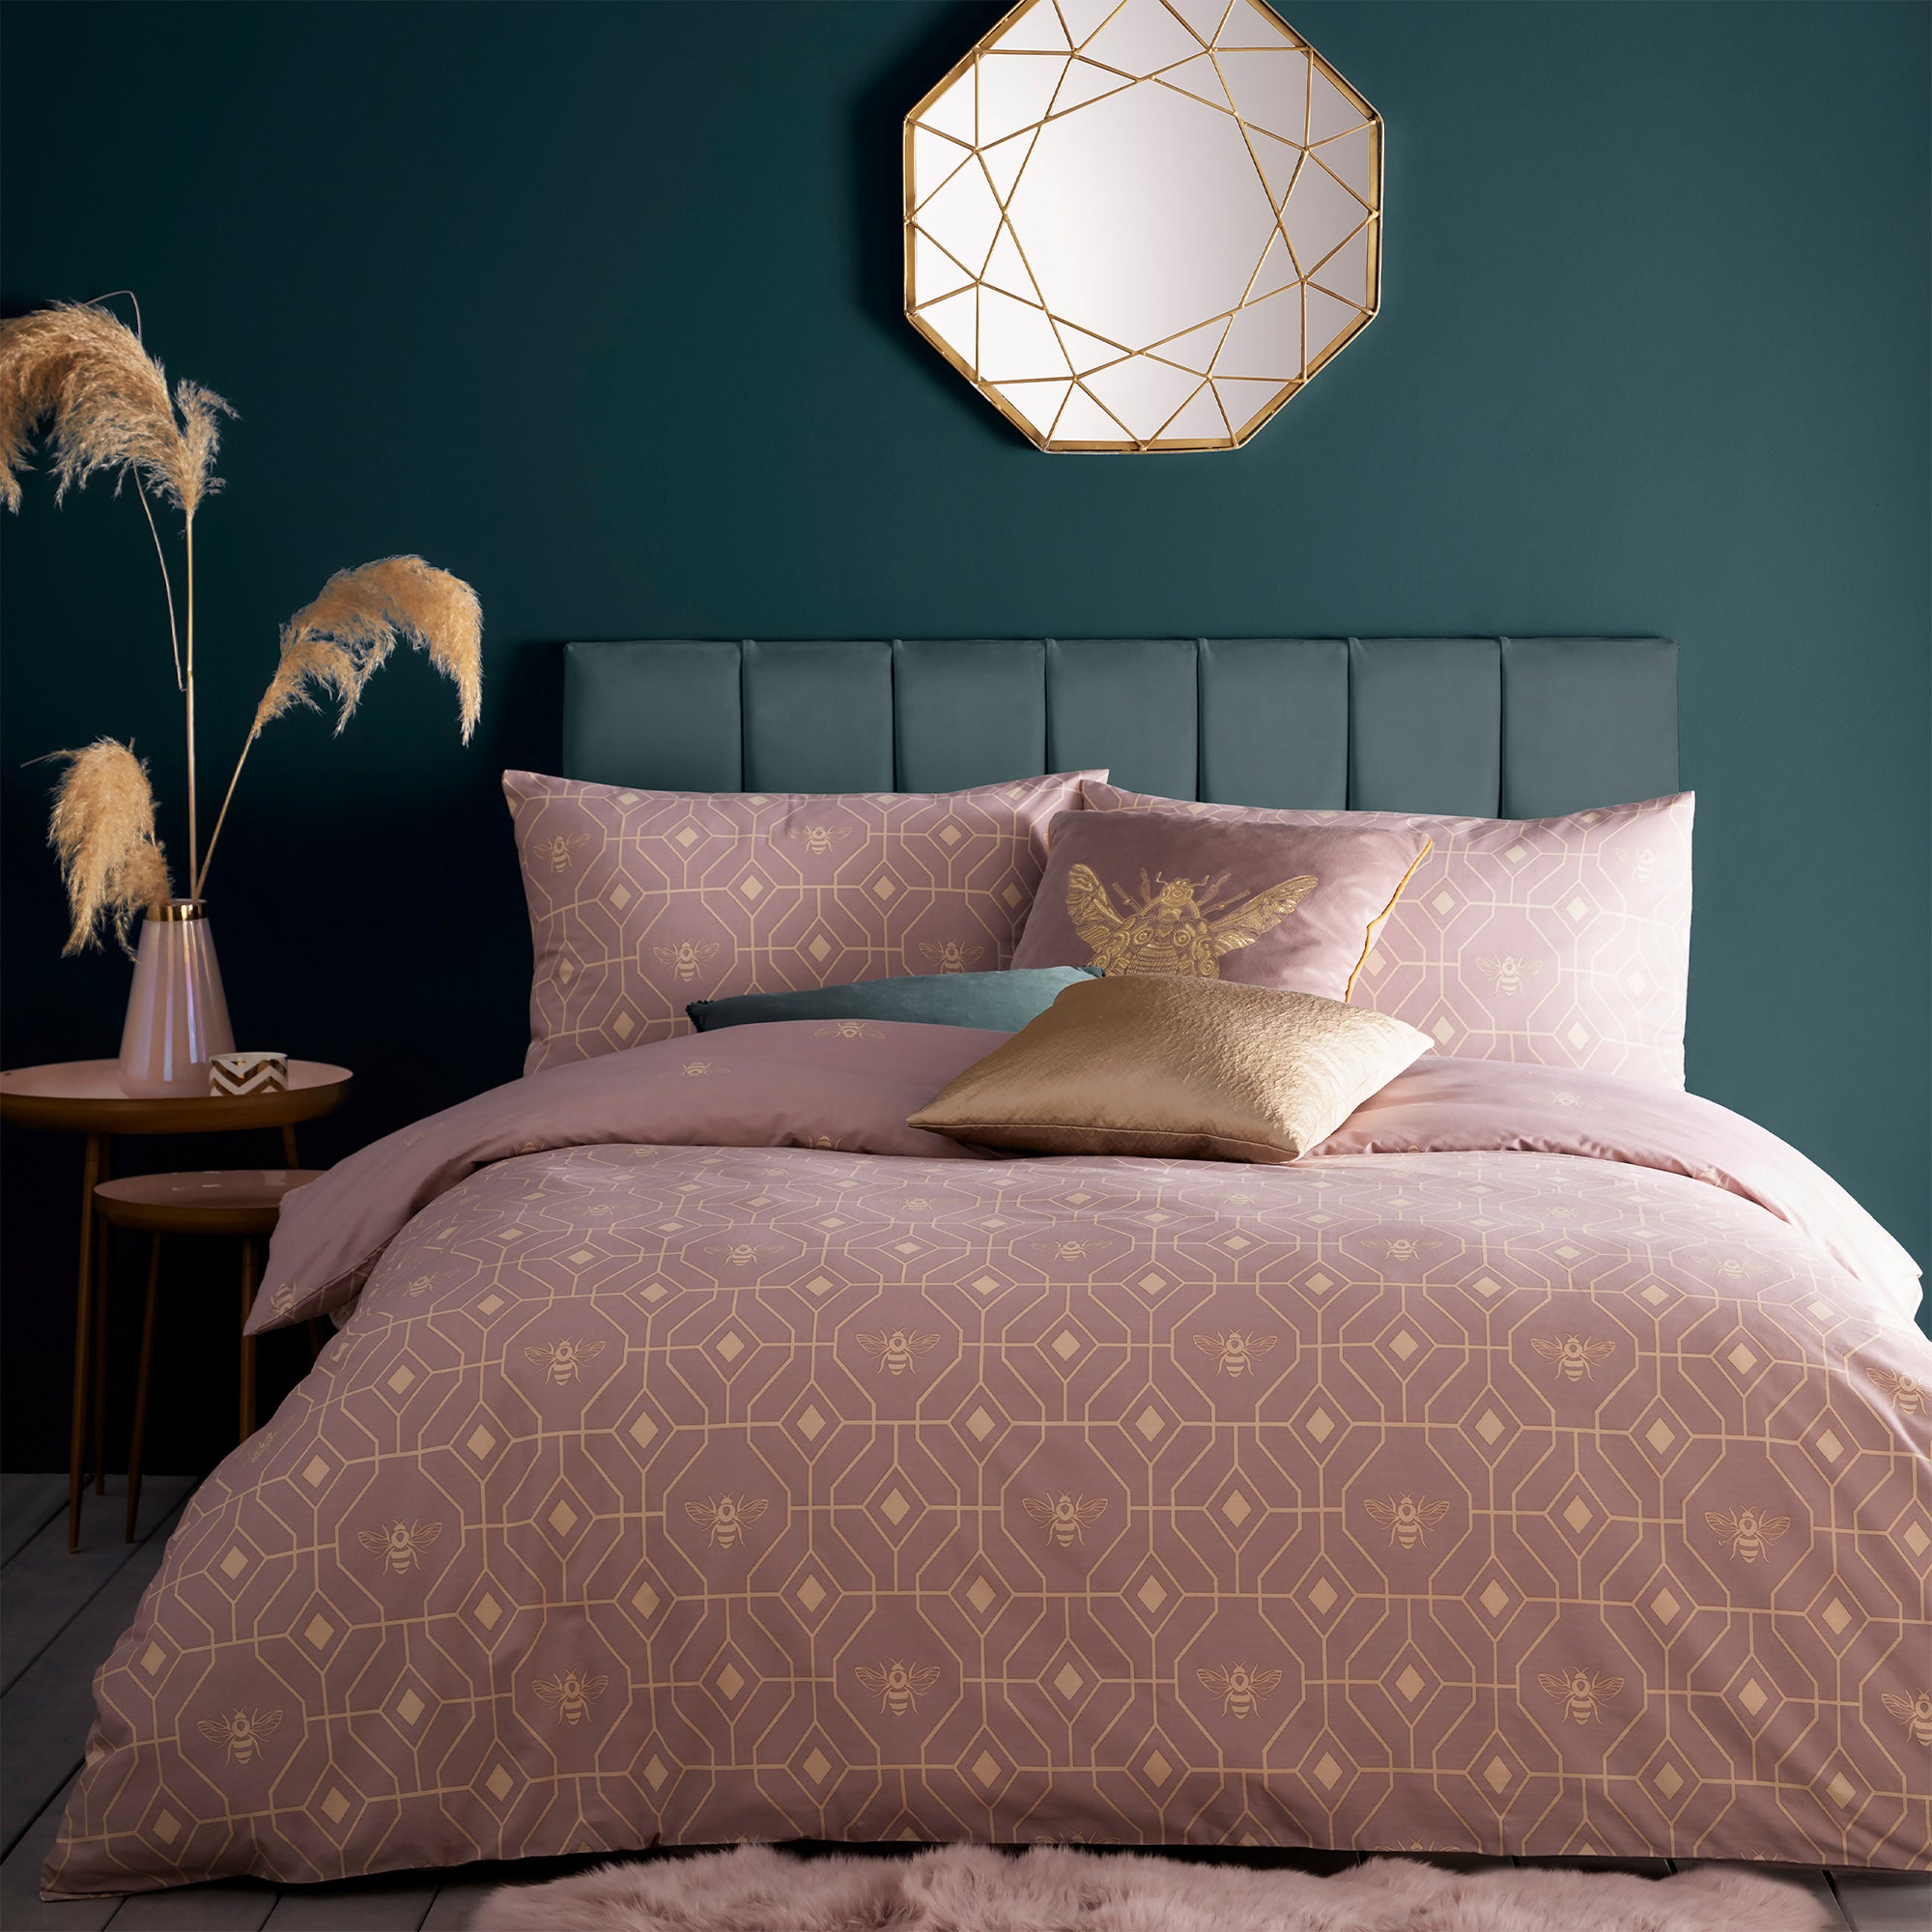 Photos - Bed Linen A&D furn. Pink and Gold Bee Deco Reversible Duvet Cover and Pillowcase Set Bei 